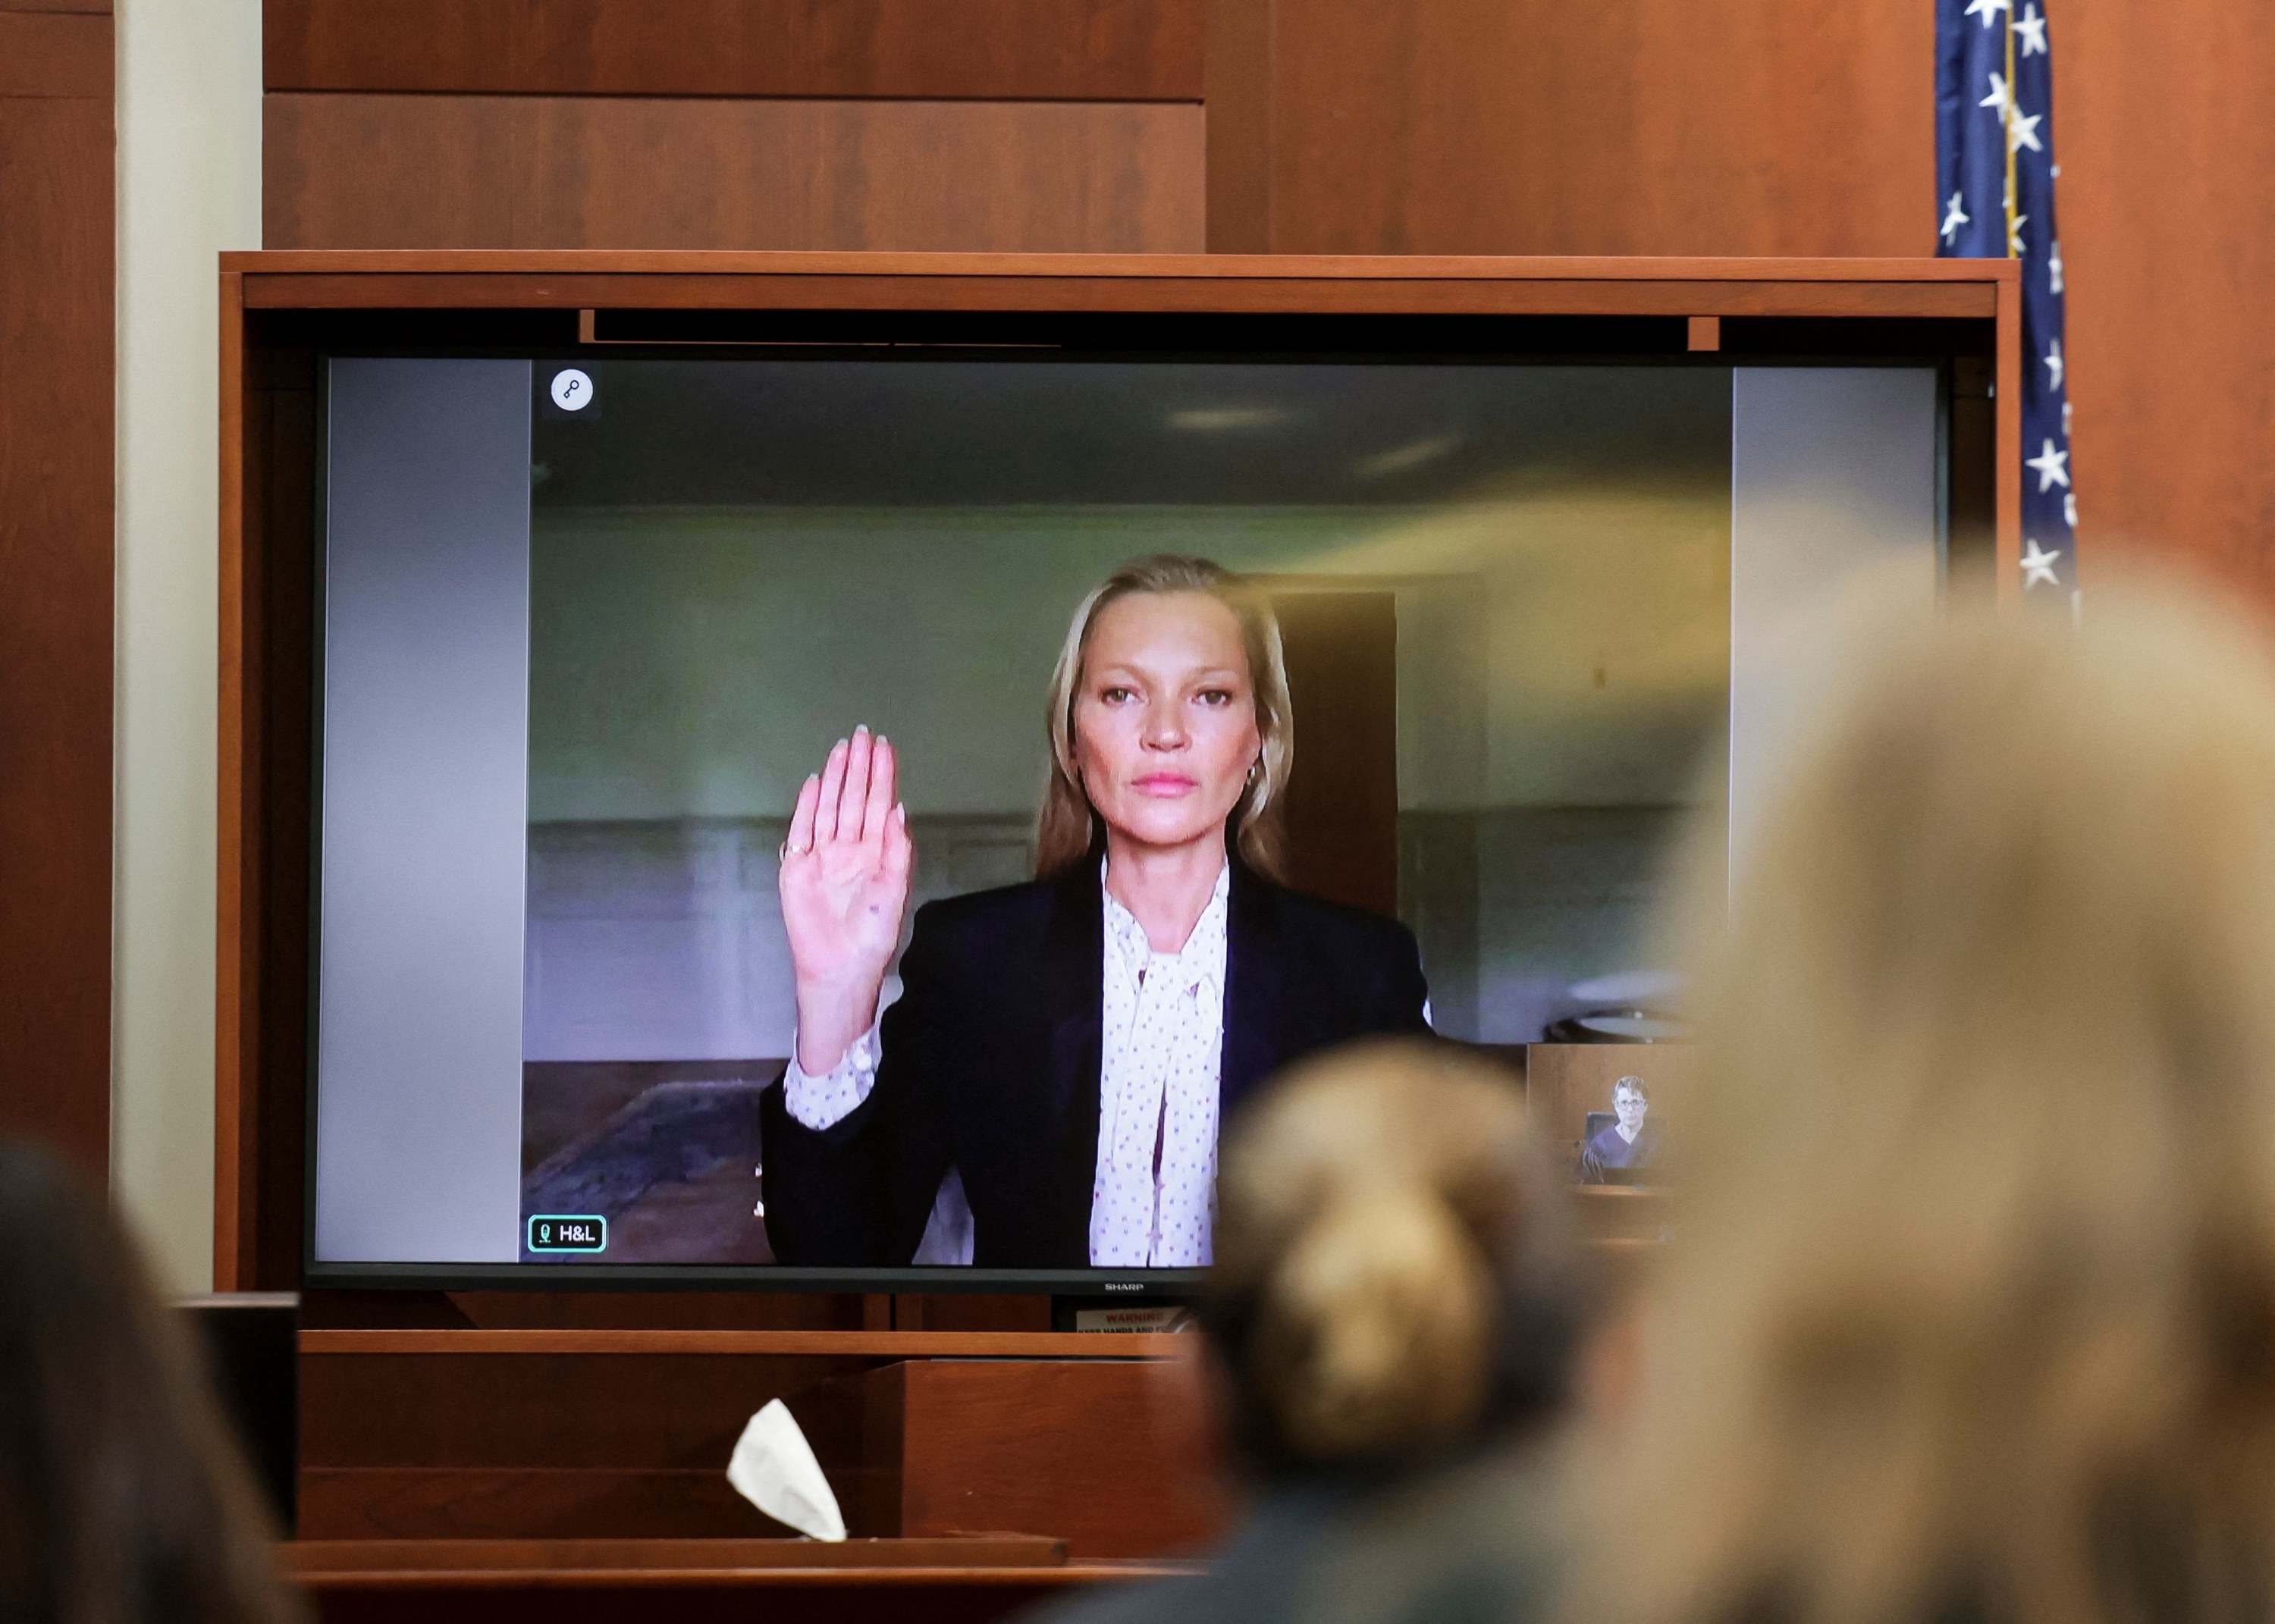 Kate Moss is sworn in via video link at the Fairfax County Circuit Courthouse in Fairfax, Virginia, on May 25, 2022